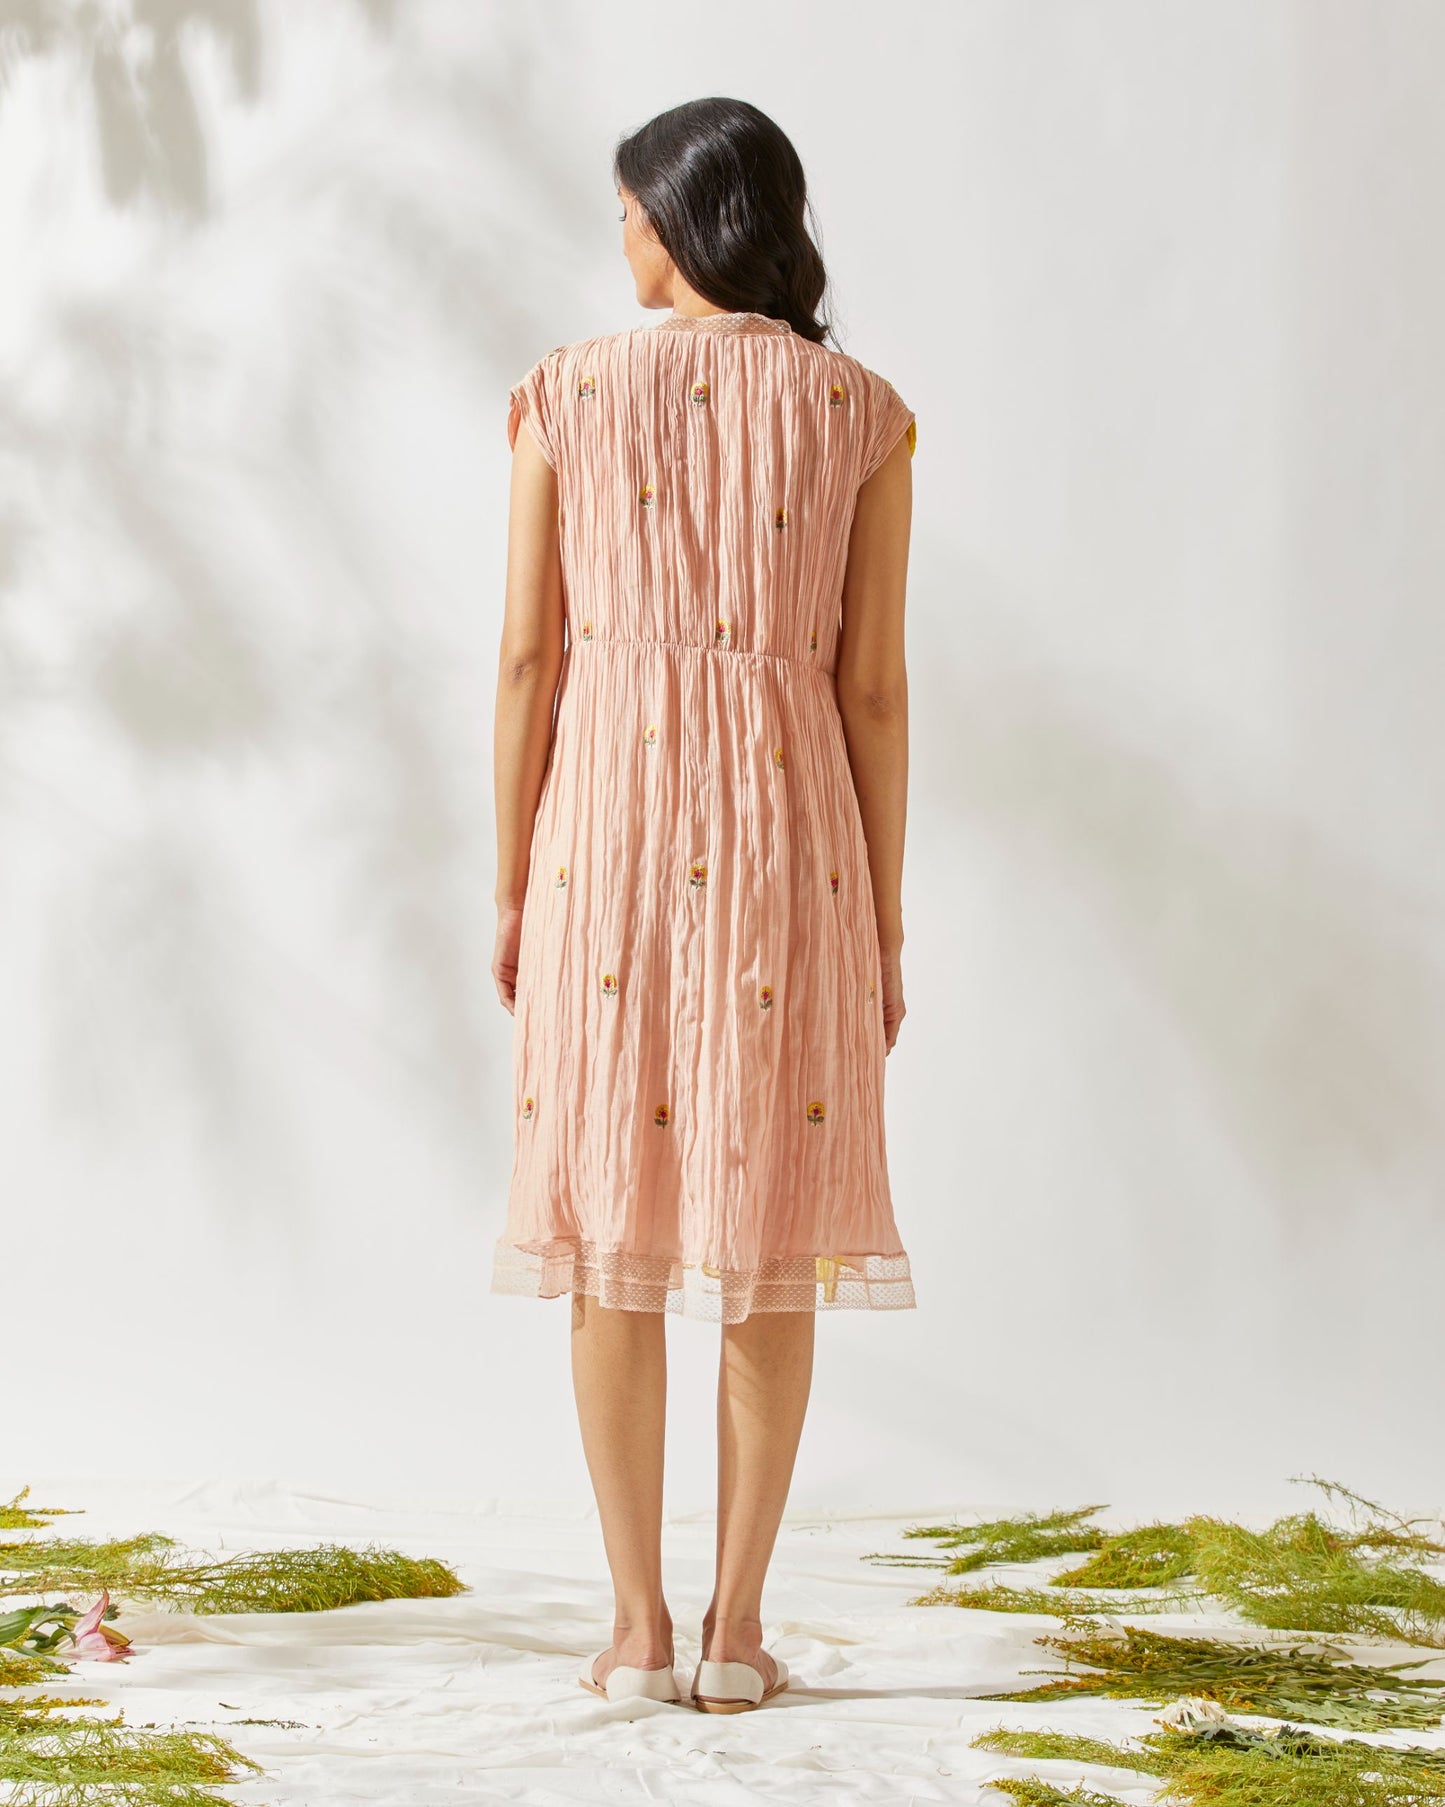 TWO TONED CARNATION KNOTTED DRESS